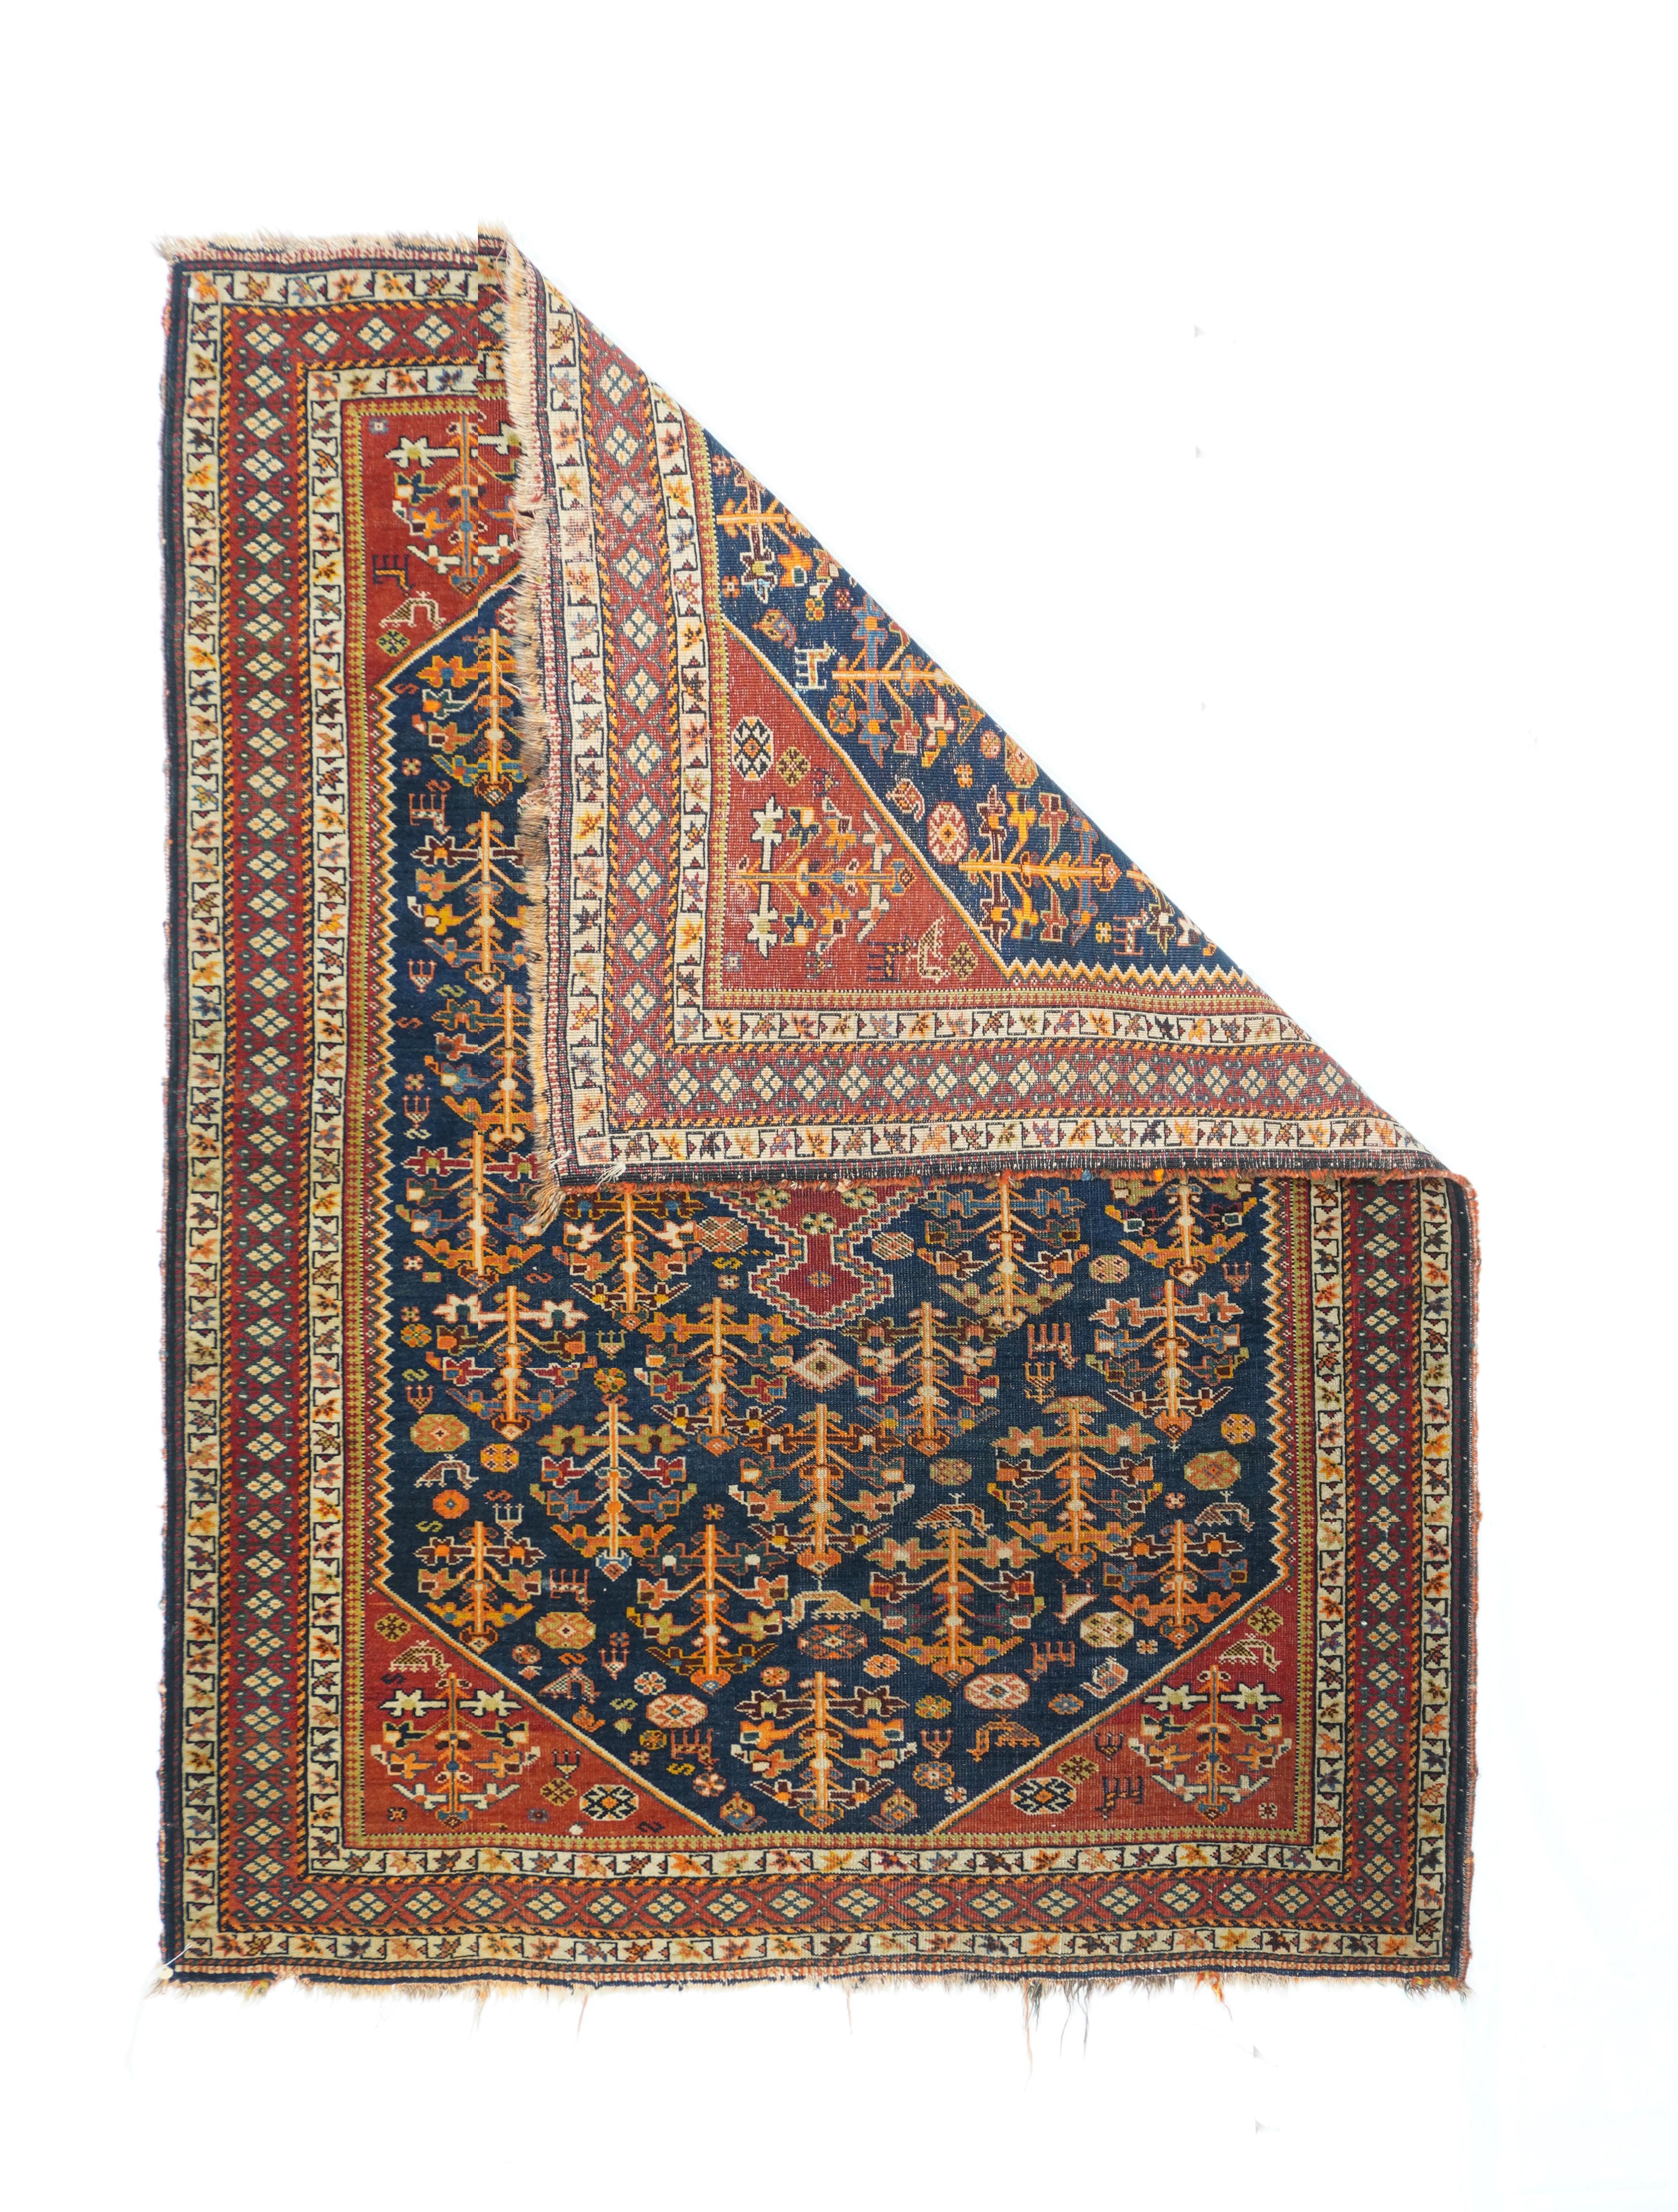 Antique Qashqai Rug. The dark blue subfield shows a zig-zag edge and an allover, unidirectional display of animals and stylized flowers, all supporting a closely pendanted stepped, red lozengoid medallion. Red corners with more flowers and little